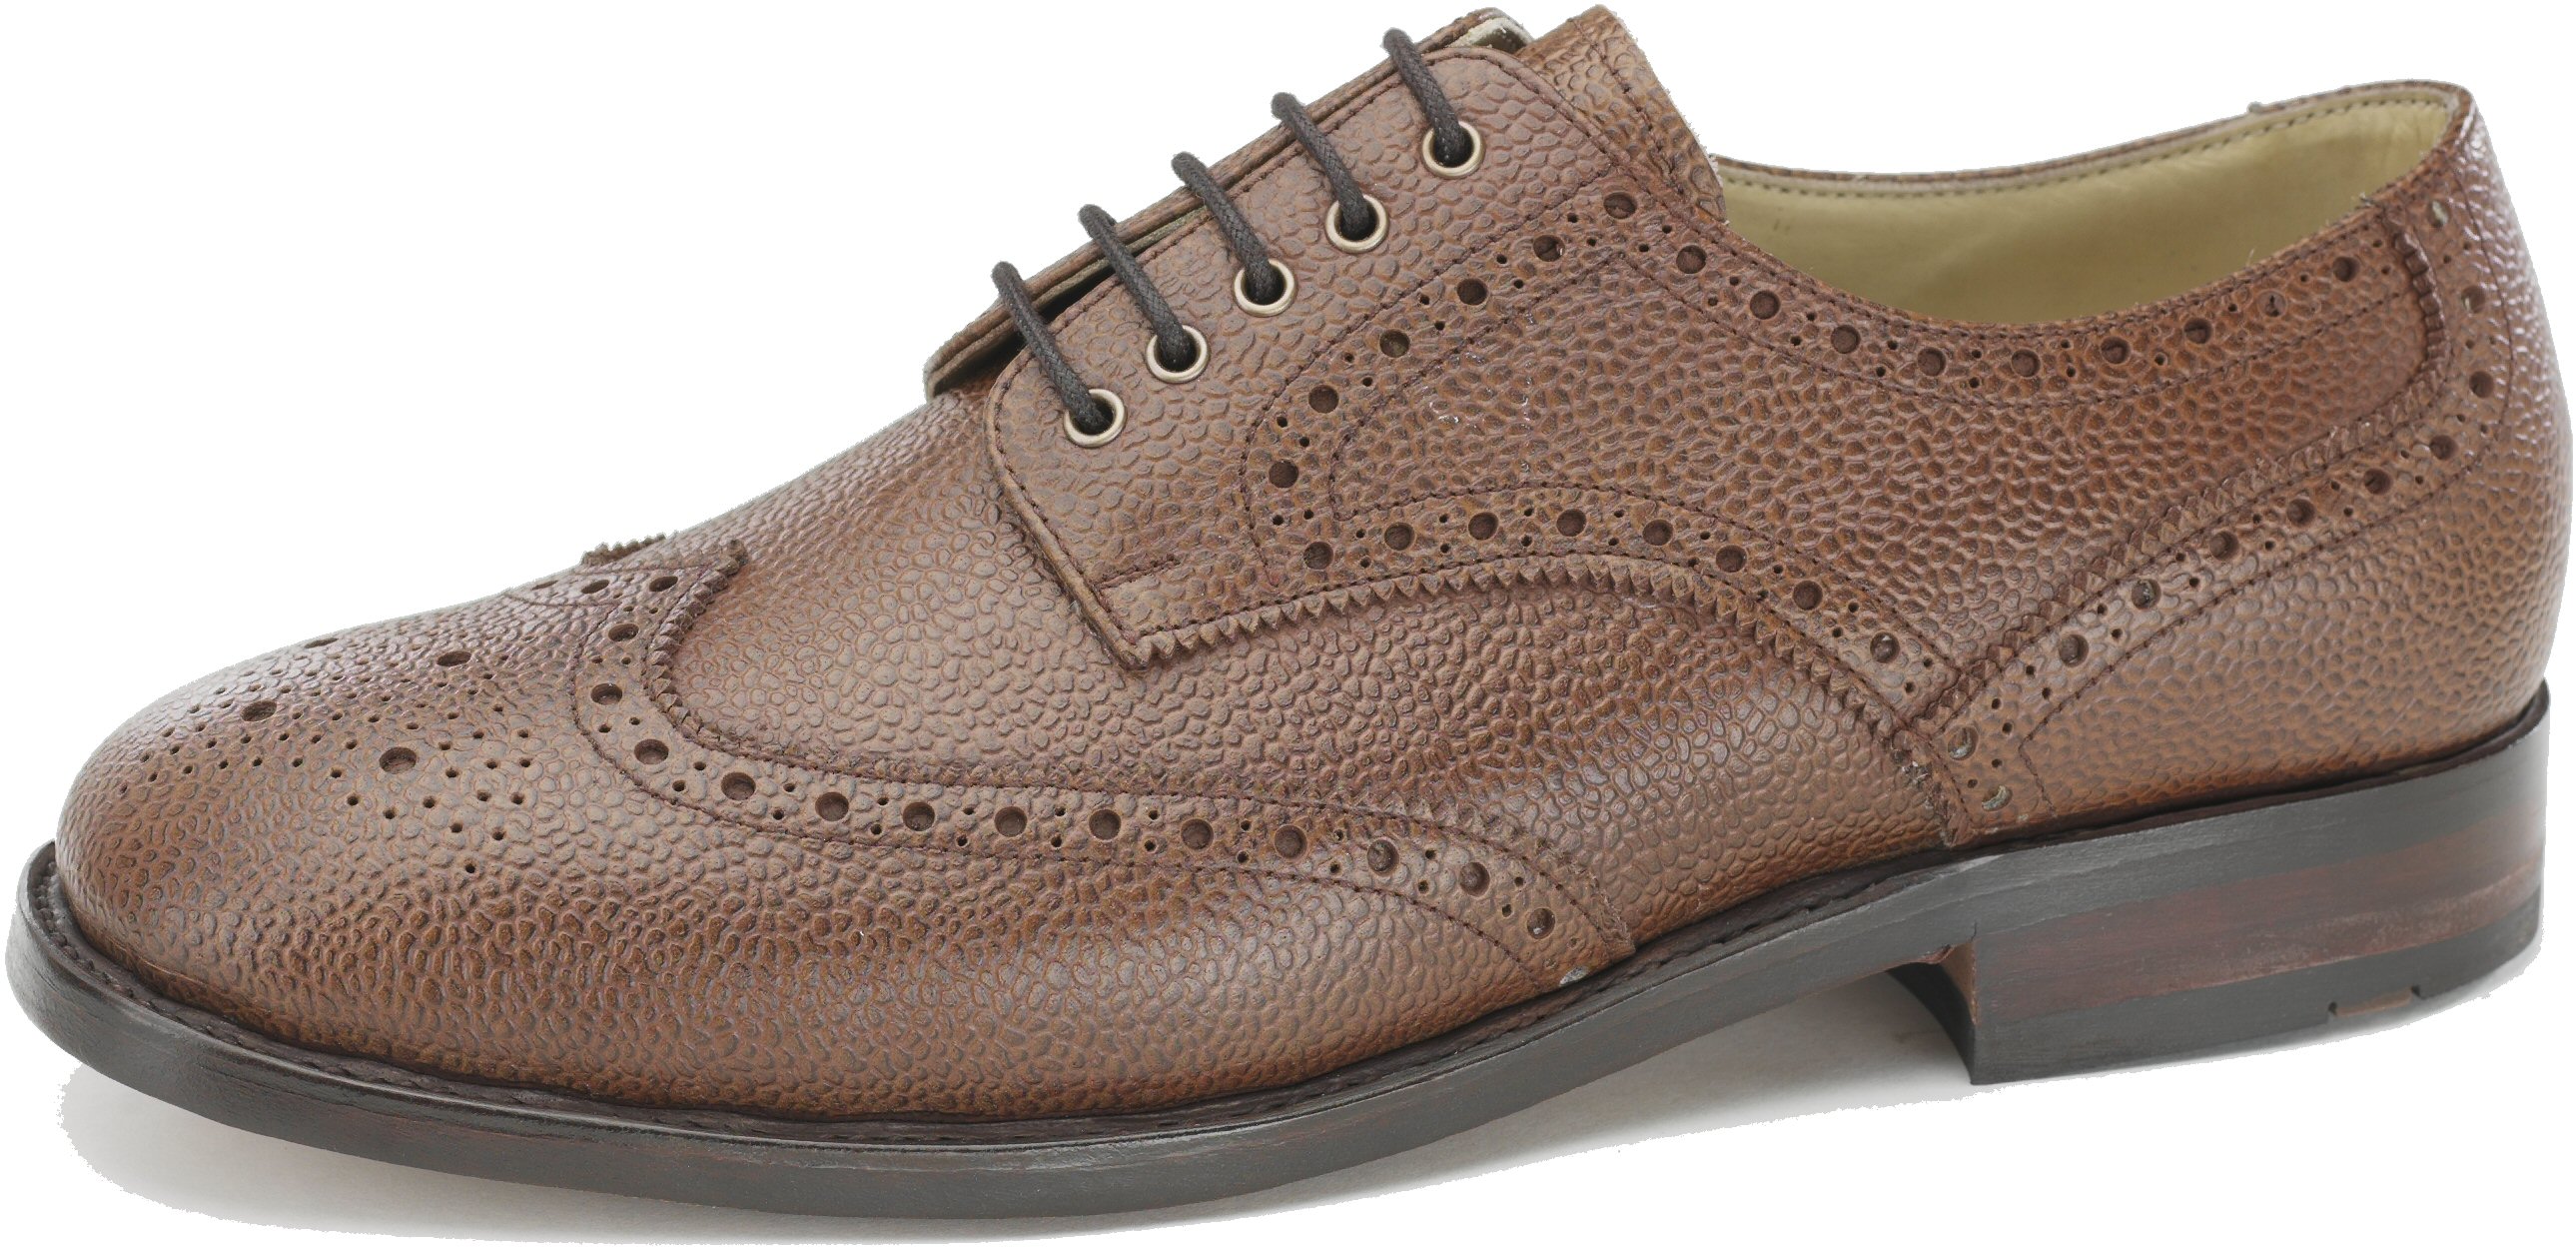 Samuel Windsor Town & Country: Grained Brogue